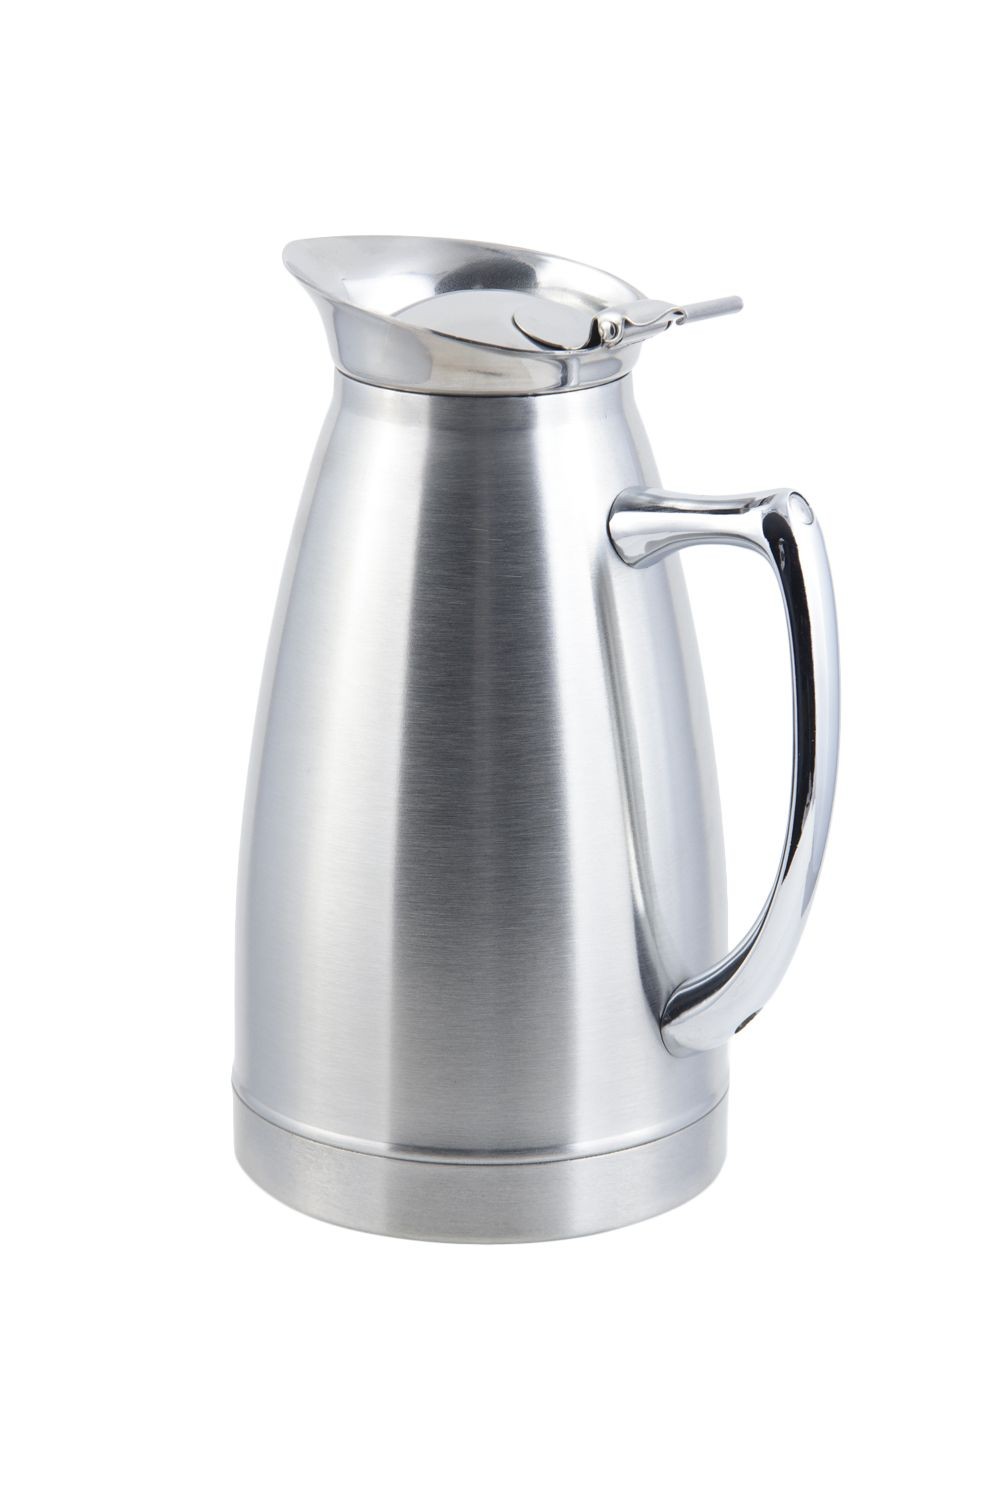 Bon Chef 4051S Stainless Steel Insulated Server with Satin Finish, 20 oz., Set of 6